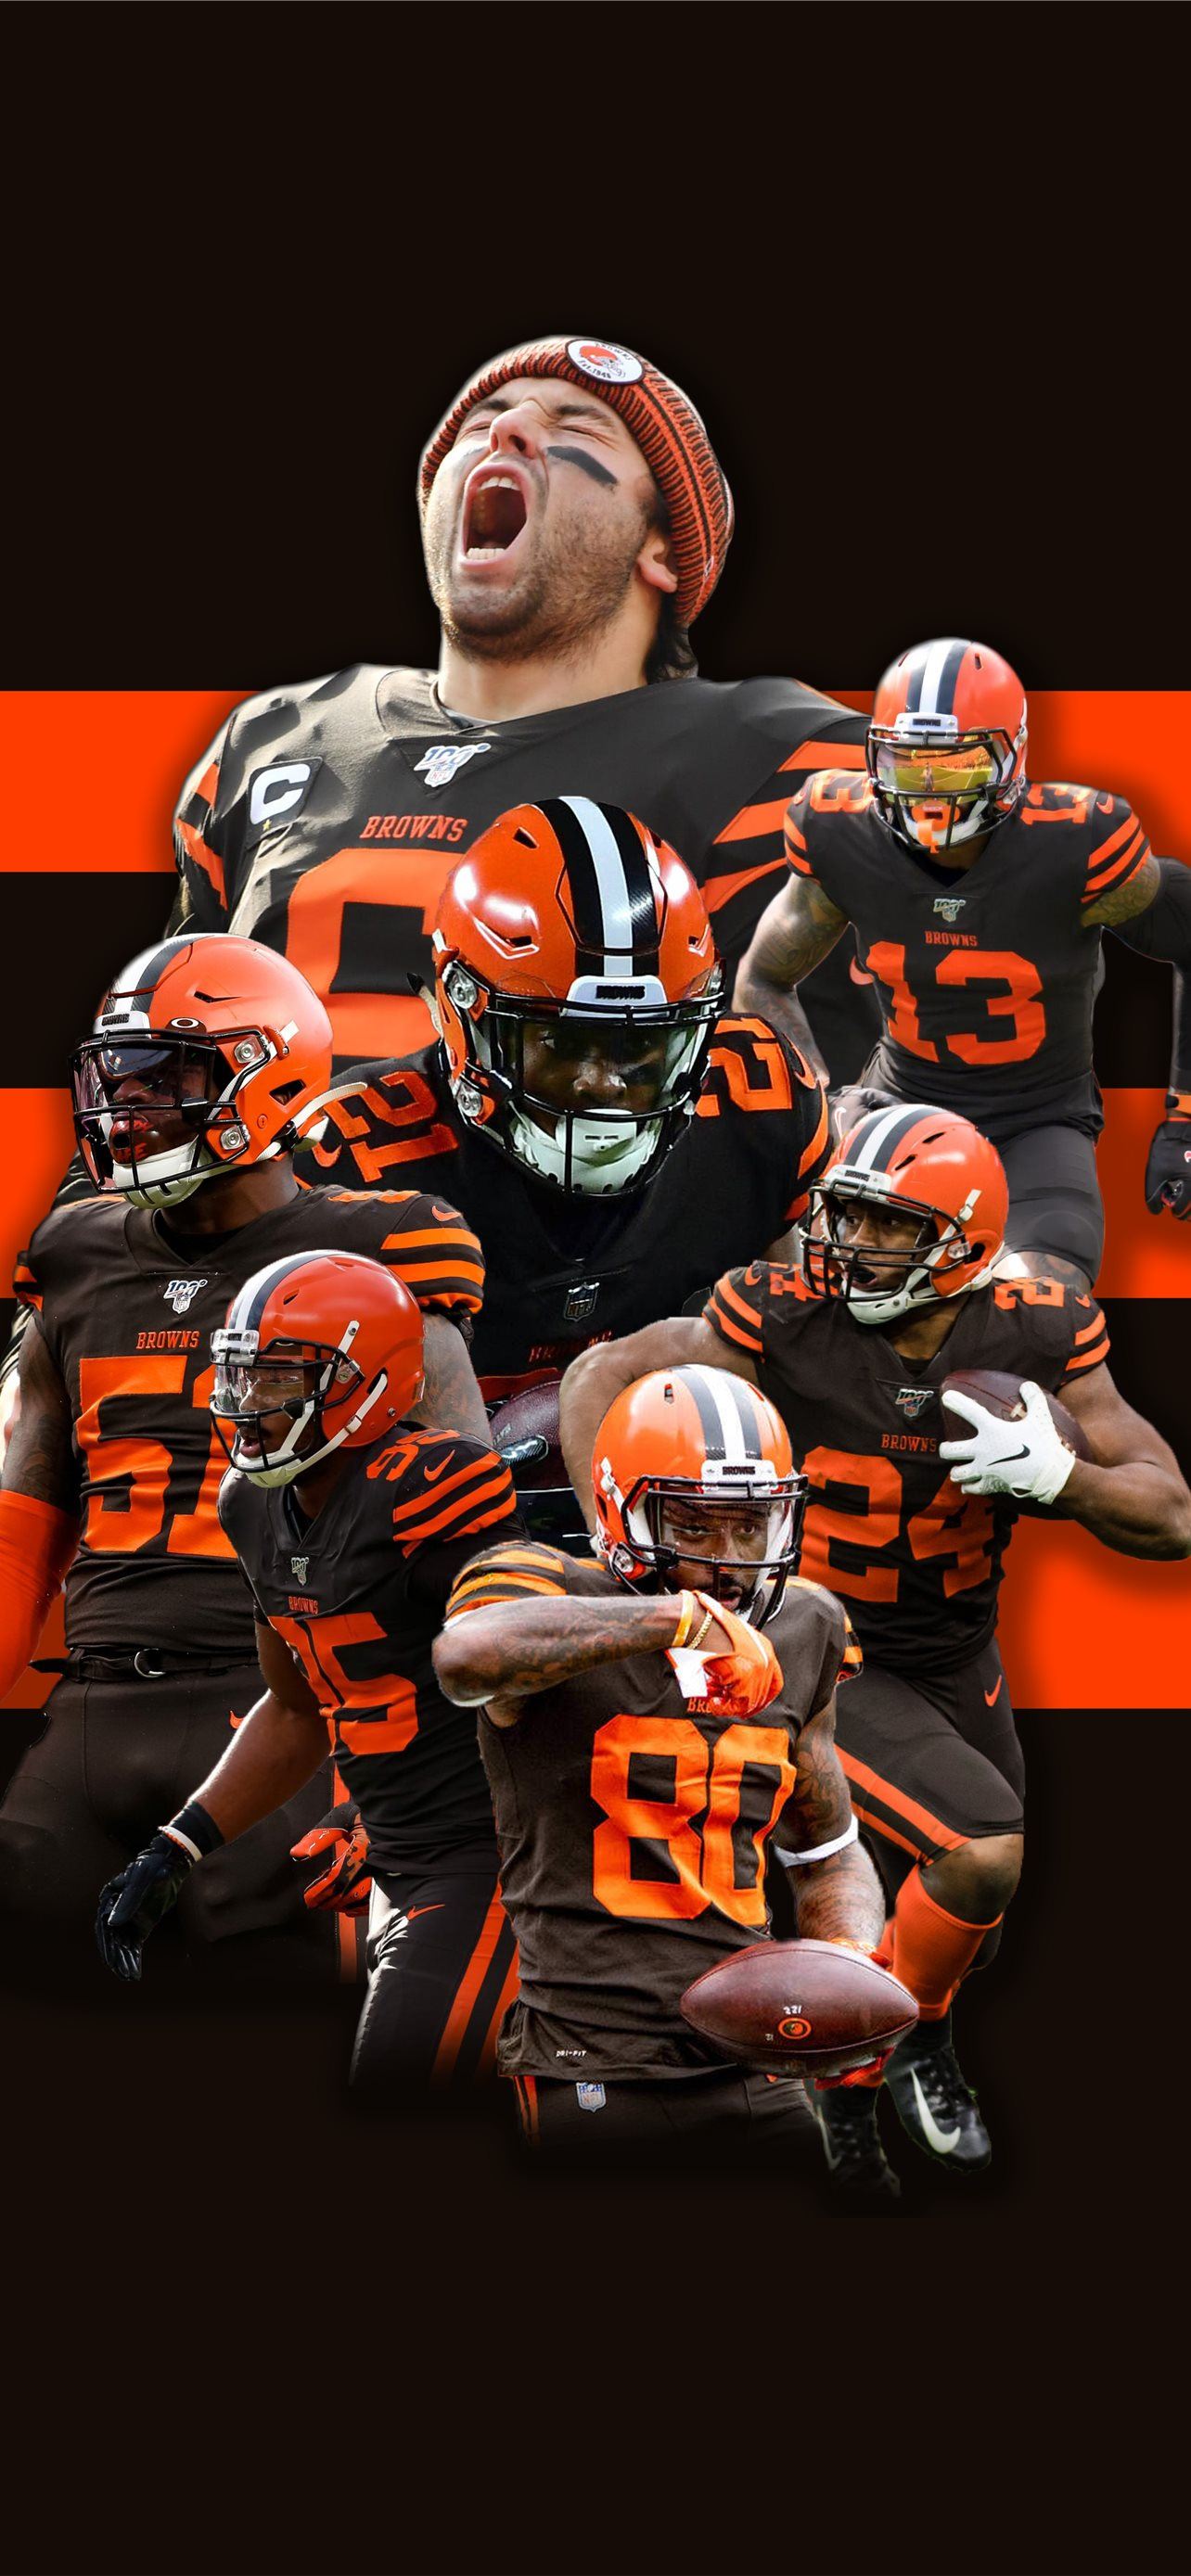 Cleveland Browns Backgrounds 71 images